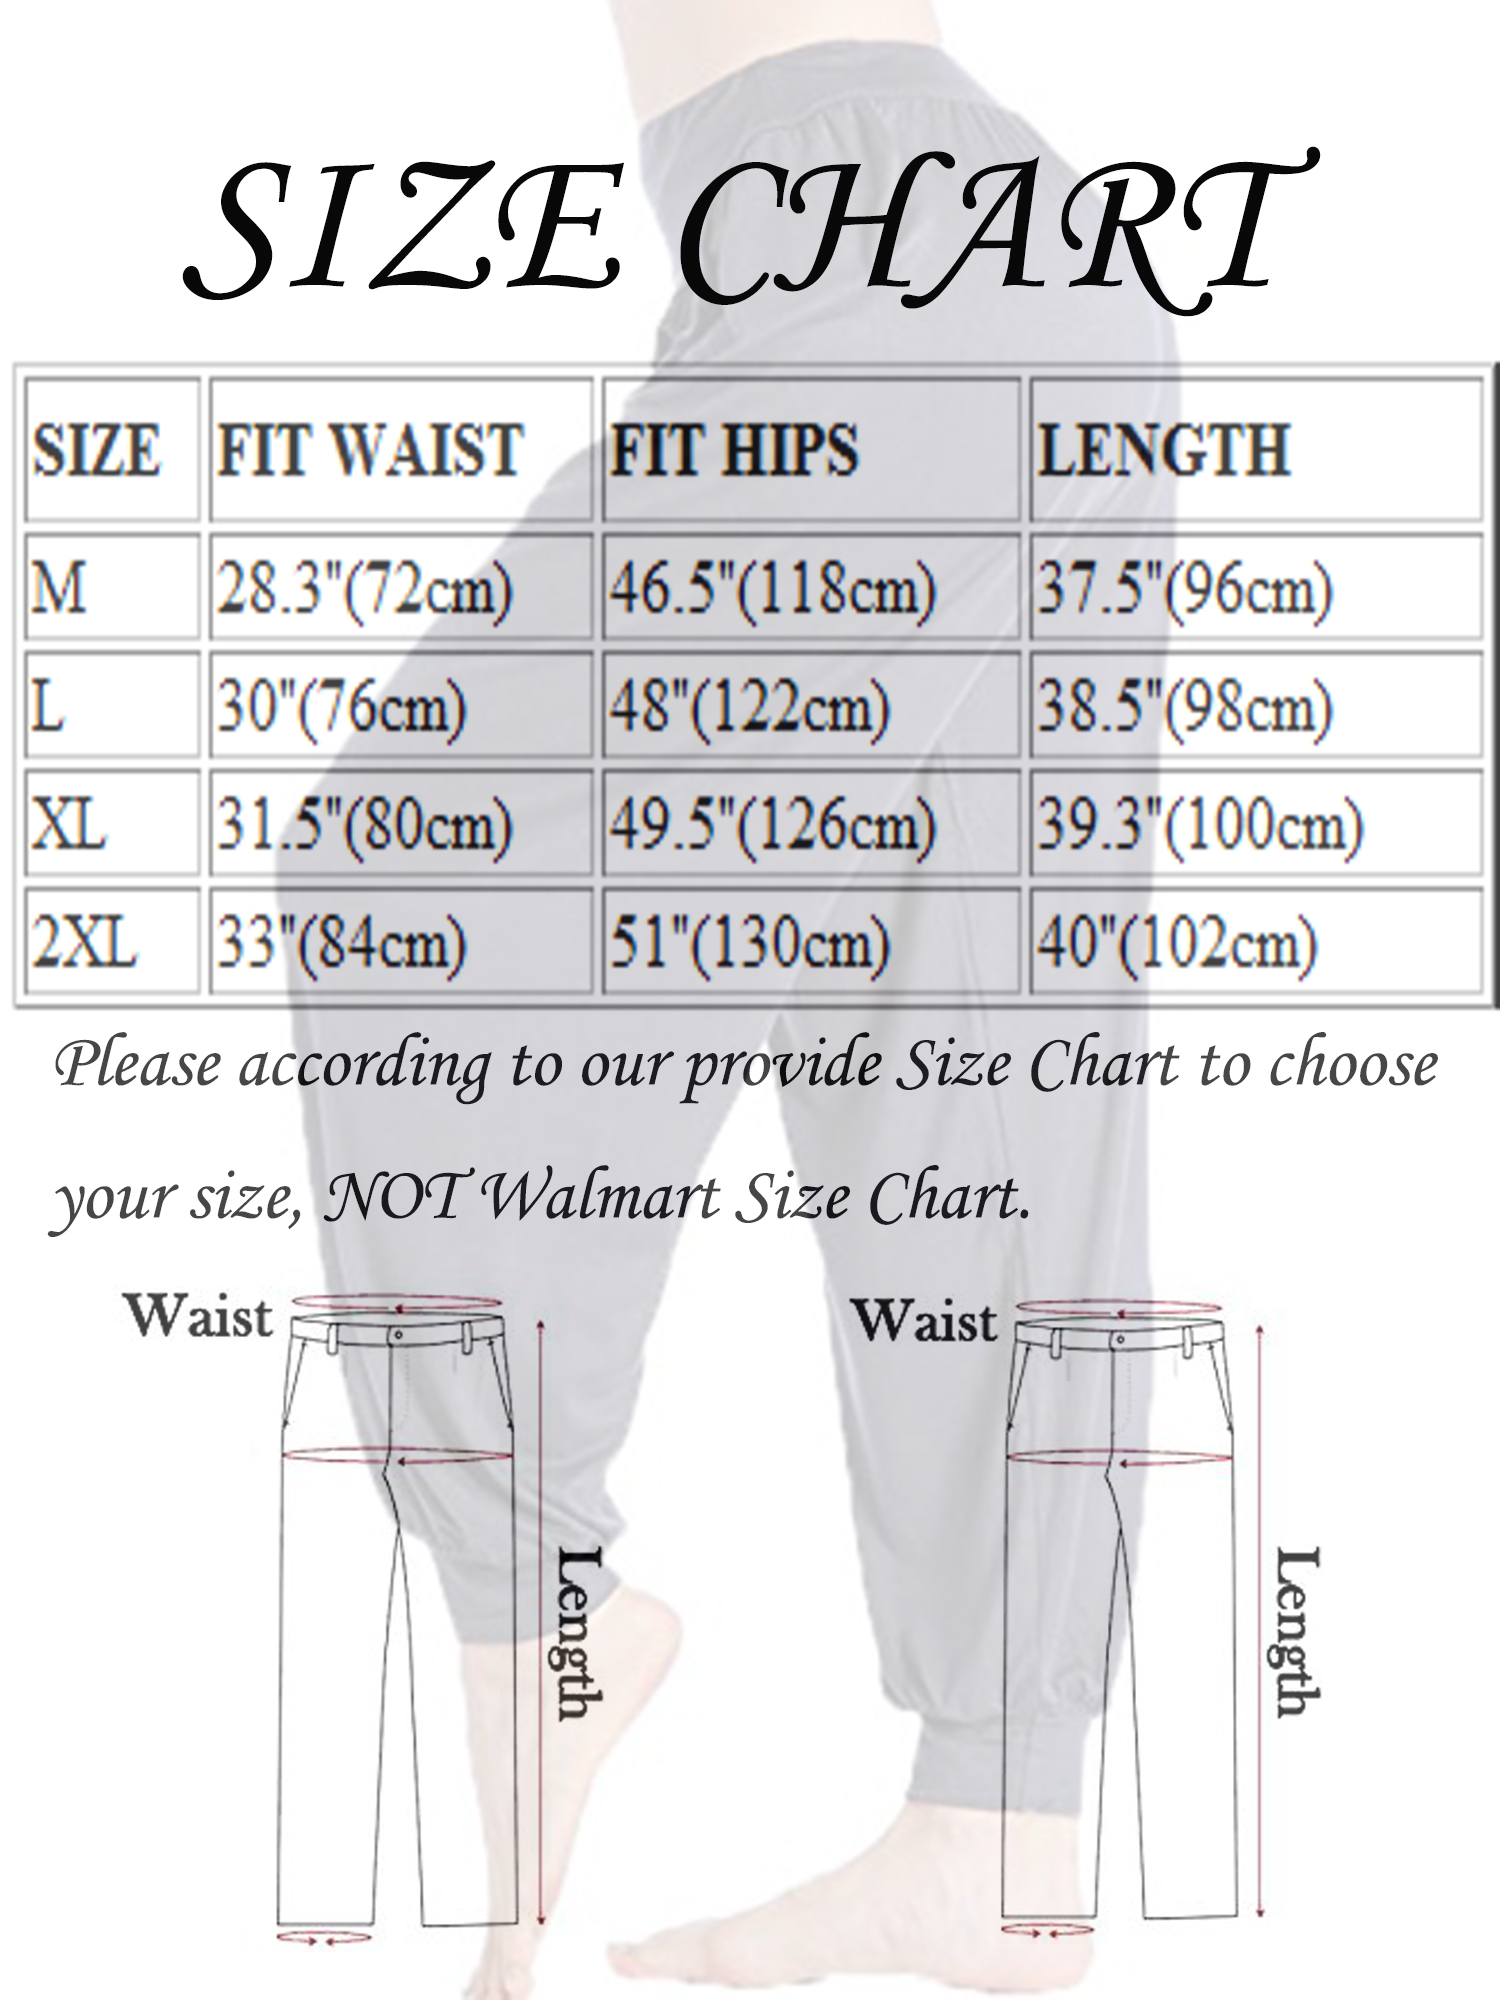 SAYFUT Women's Casual Yoga Pants Loose Fit Style Trousers Wide Leg Activewear Relaxed Fit Pants Black/Gray/Dark Grey - image 3 of 7